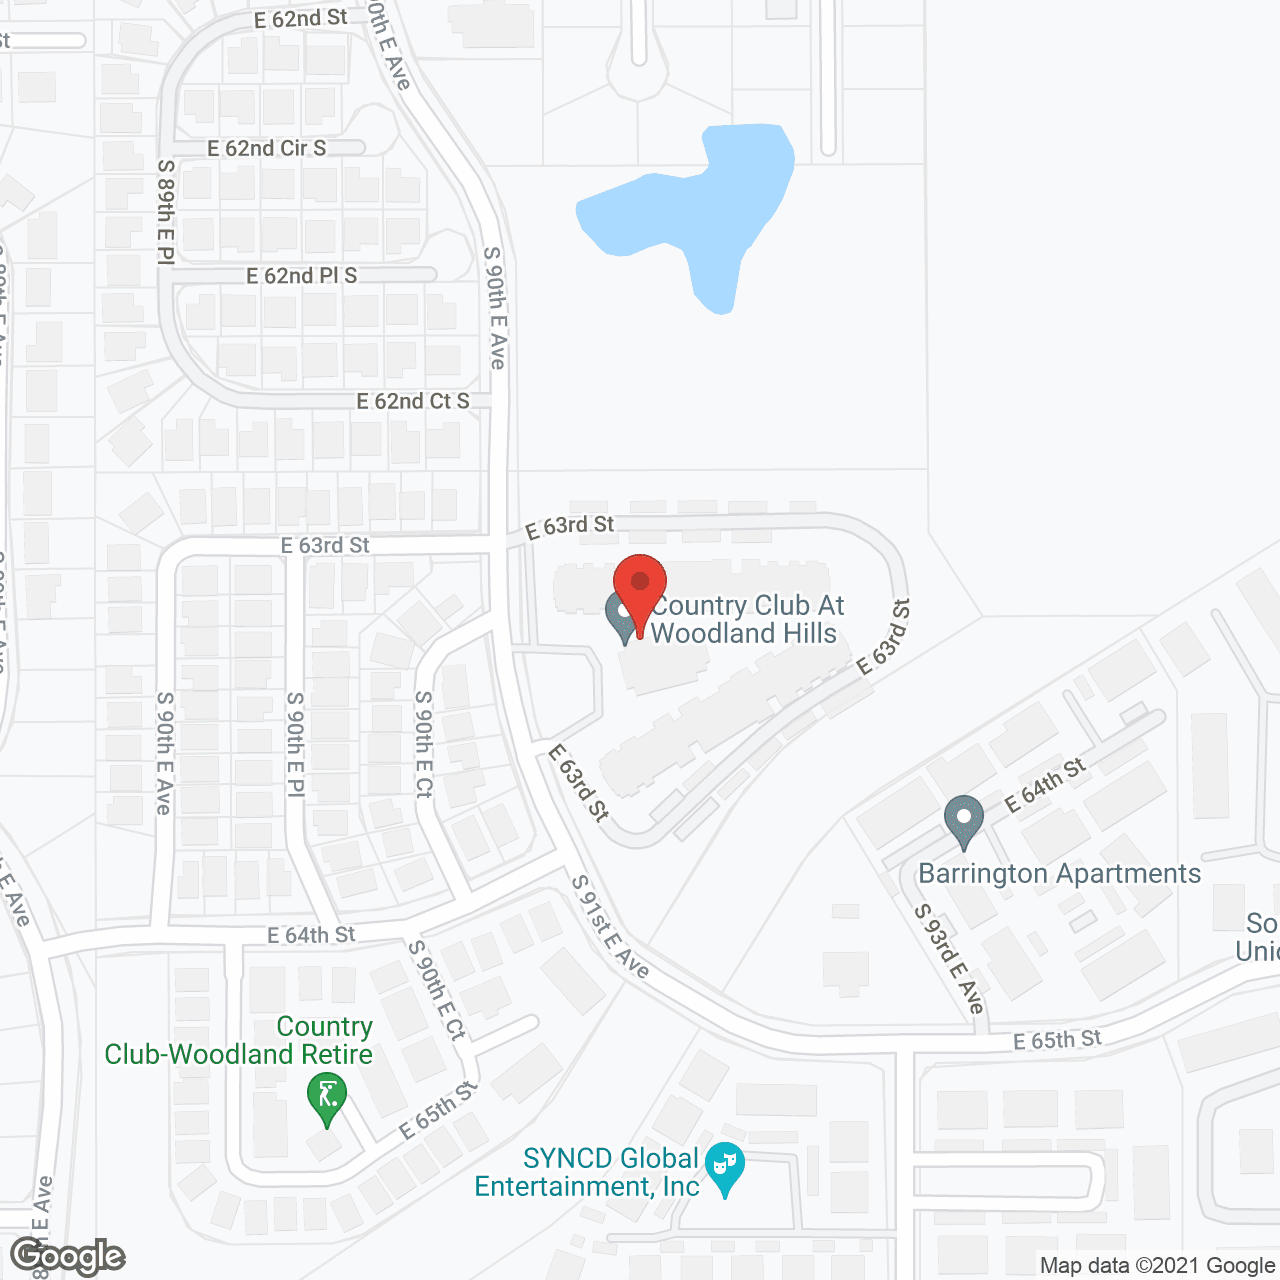 Country Club At Woodland Hills in google map